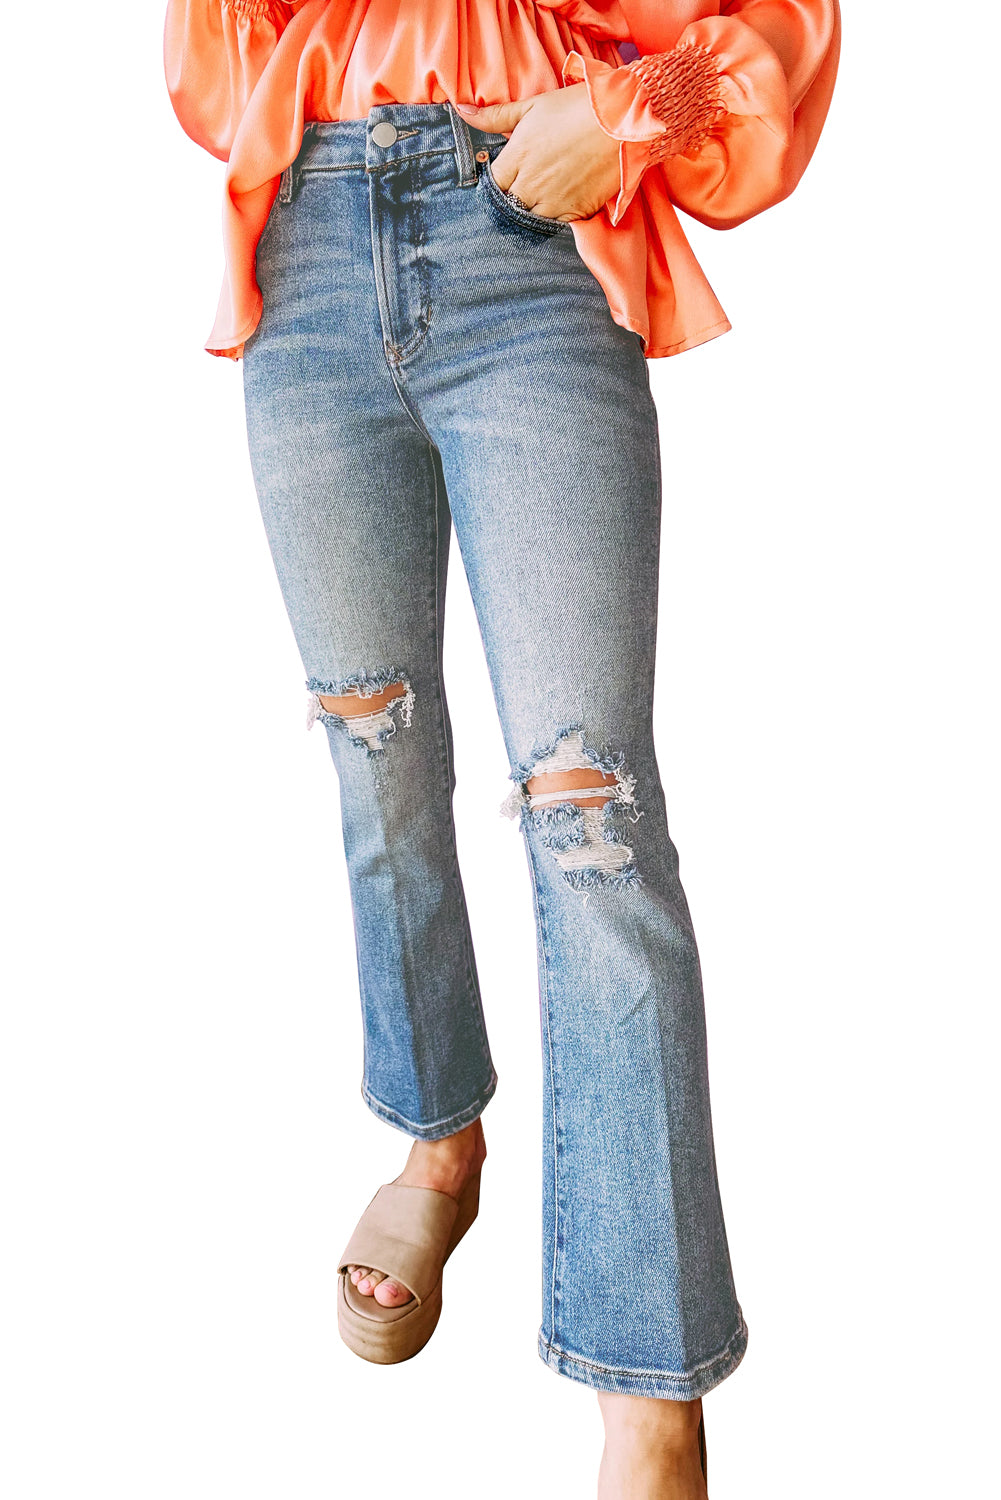 Sky Blue Distressed Ripped Flare Jeans